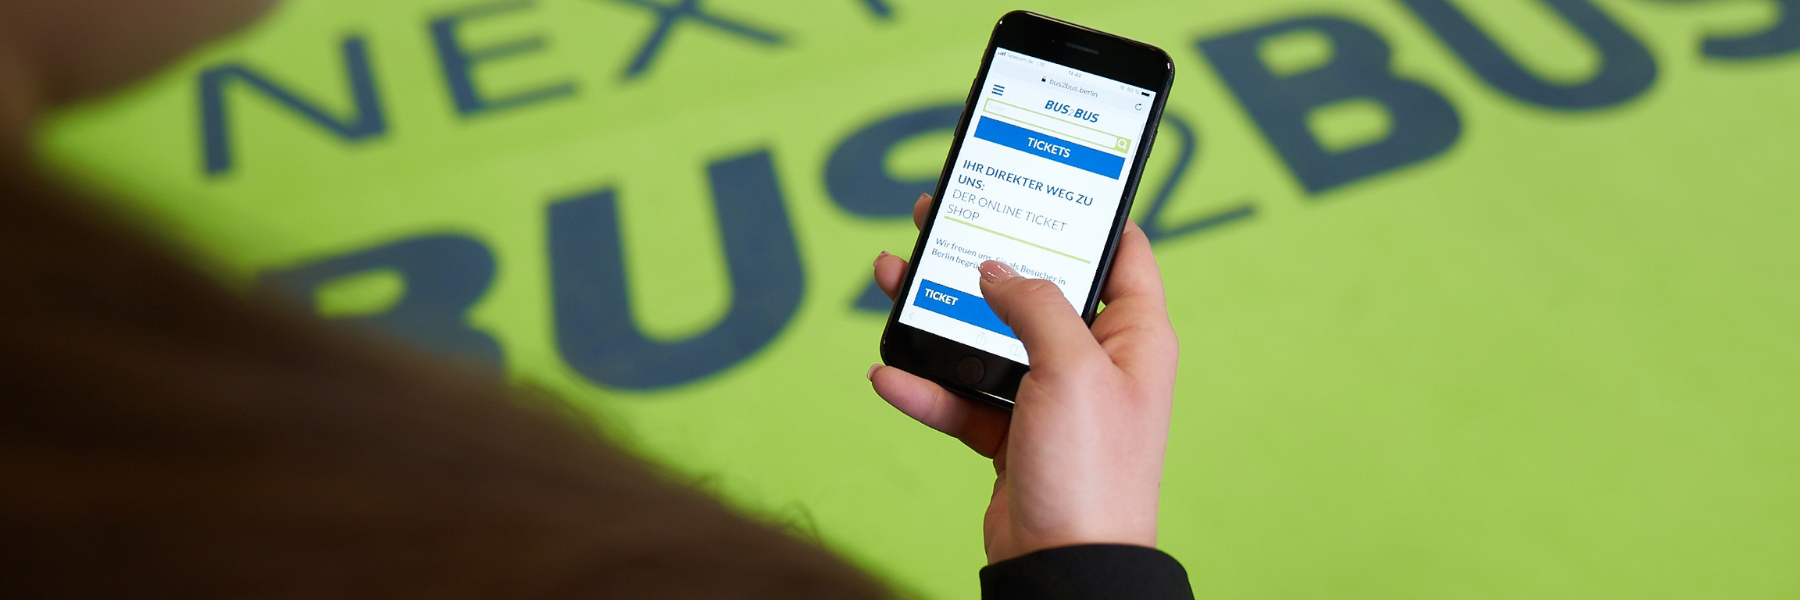 The BUS2BUS website, or more precisely the ticket shop, can be seen on the display of a smartphone held by a trade visitor.